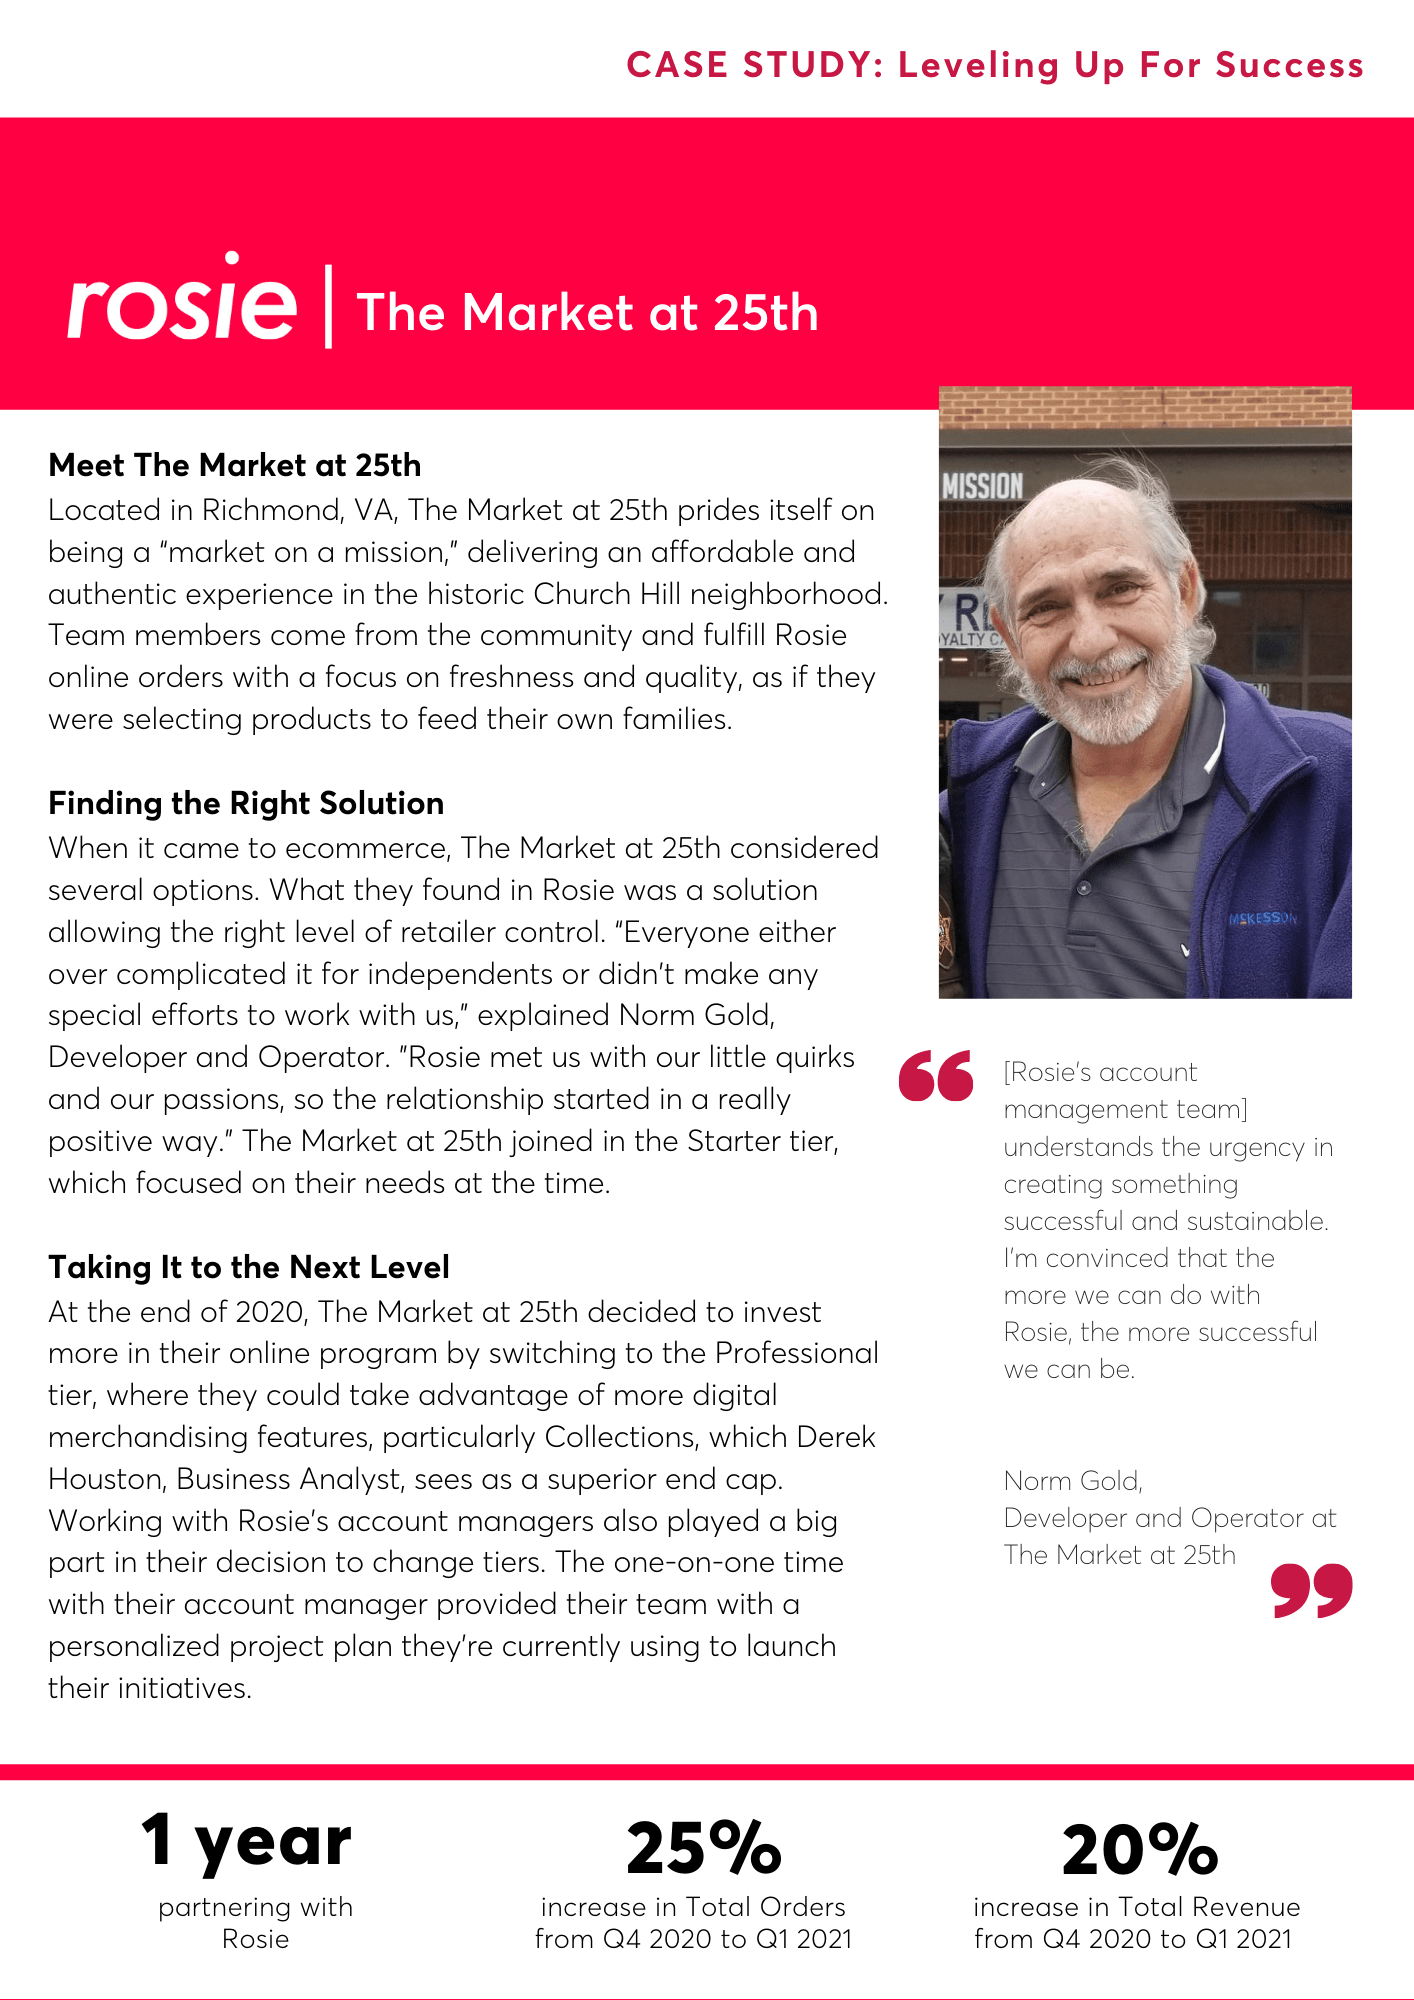 First page of the case study for The Market at 25th.